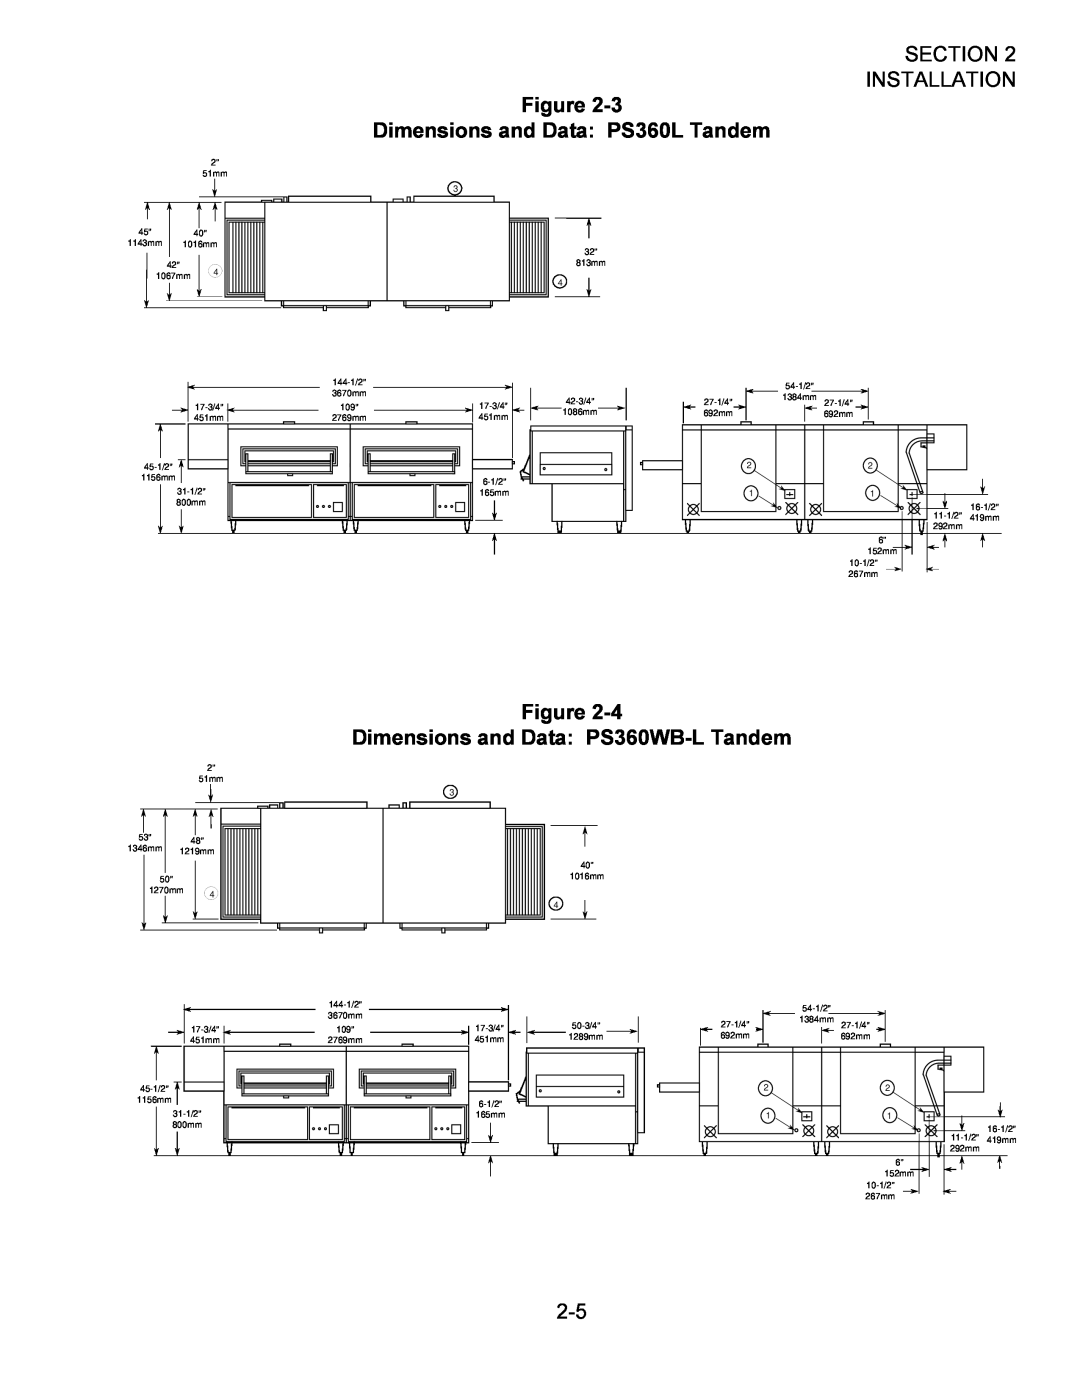 Middleby Marshall Oven Dimensions and Data PS360L Tandem, Dimensions and Data PS360WB-L Tandem, Section Installation 